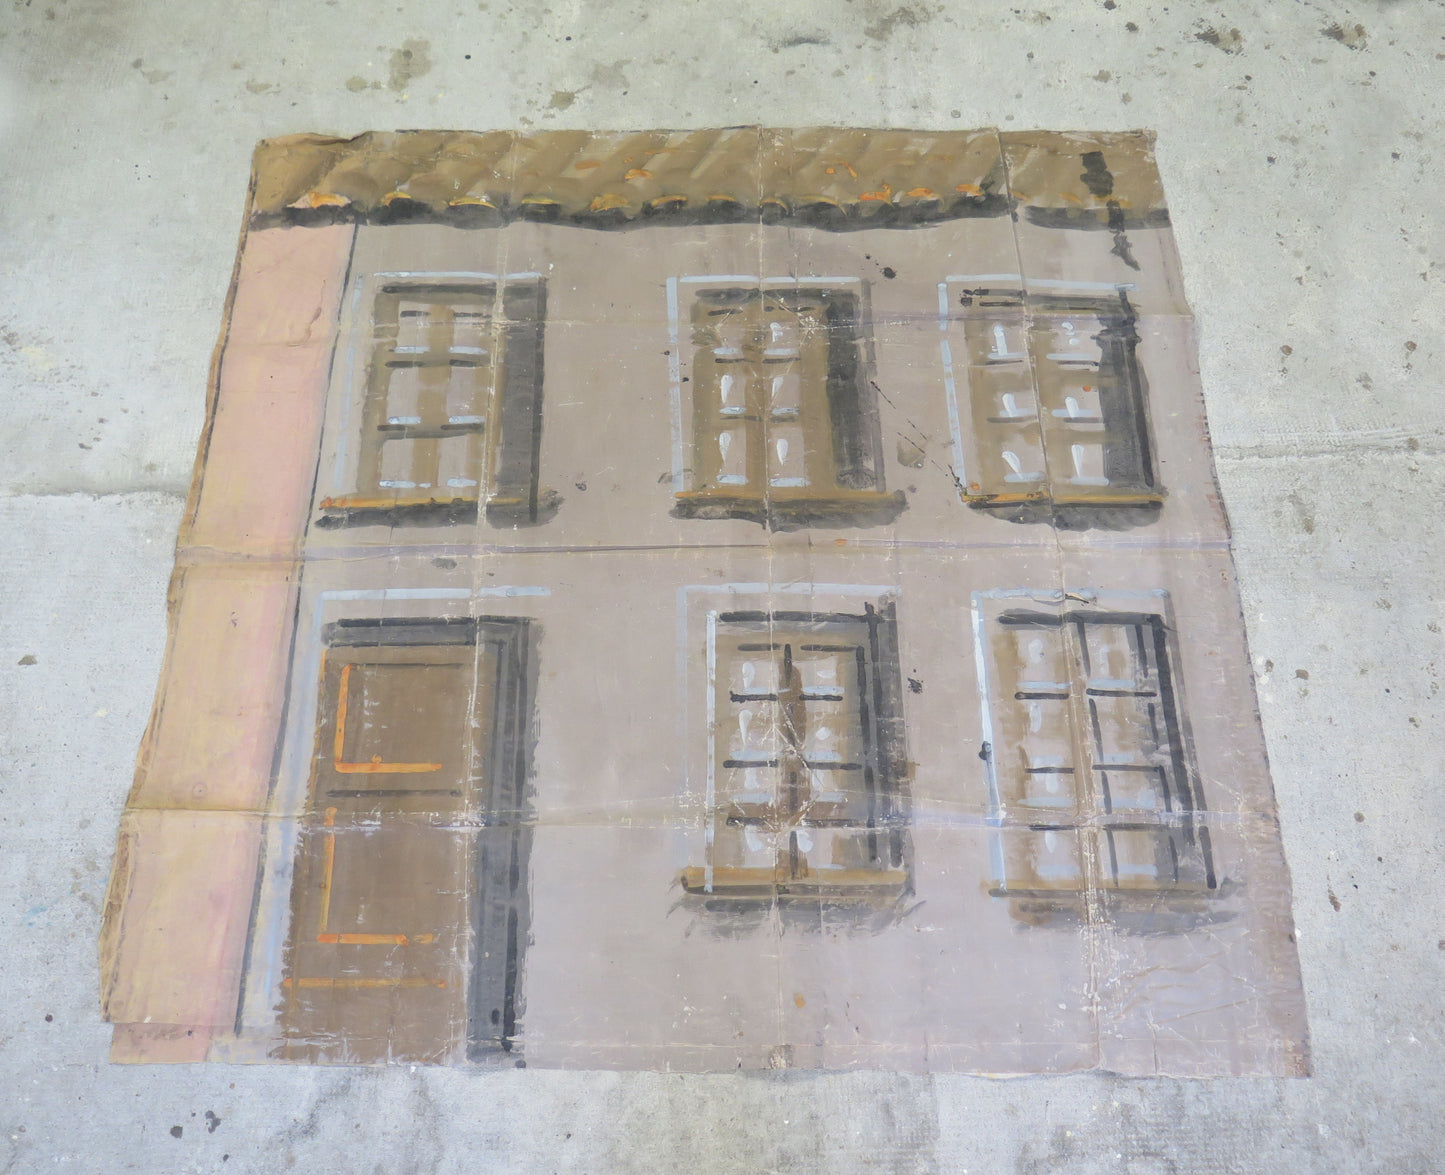 167x165 cm THEATER SET ANCIENT PALACE FACADE PAINTED ON PAPER CL2.3